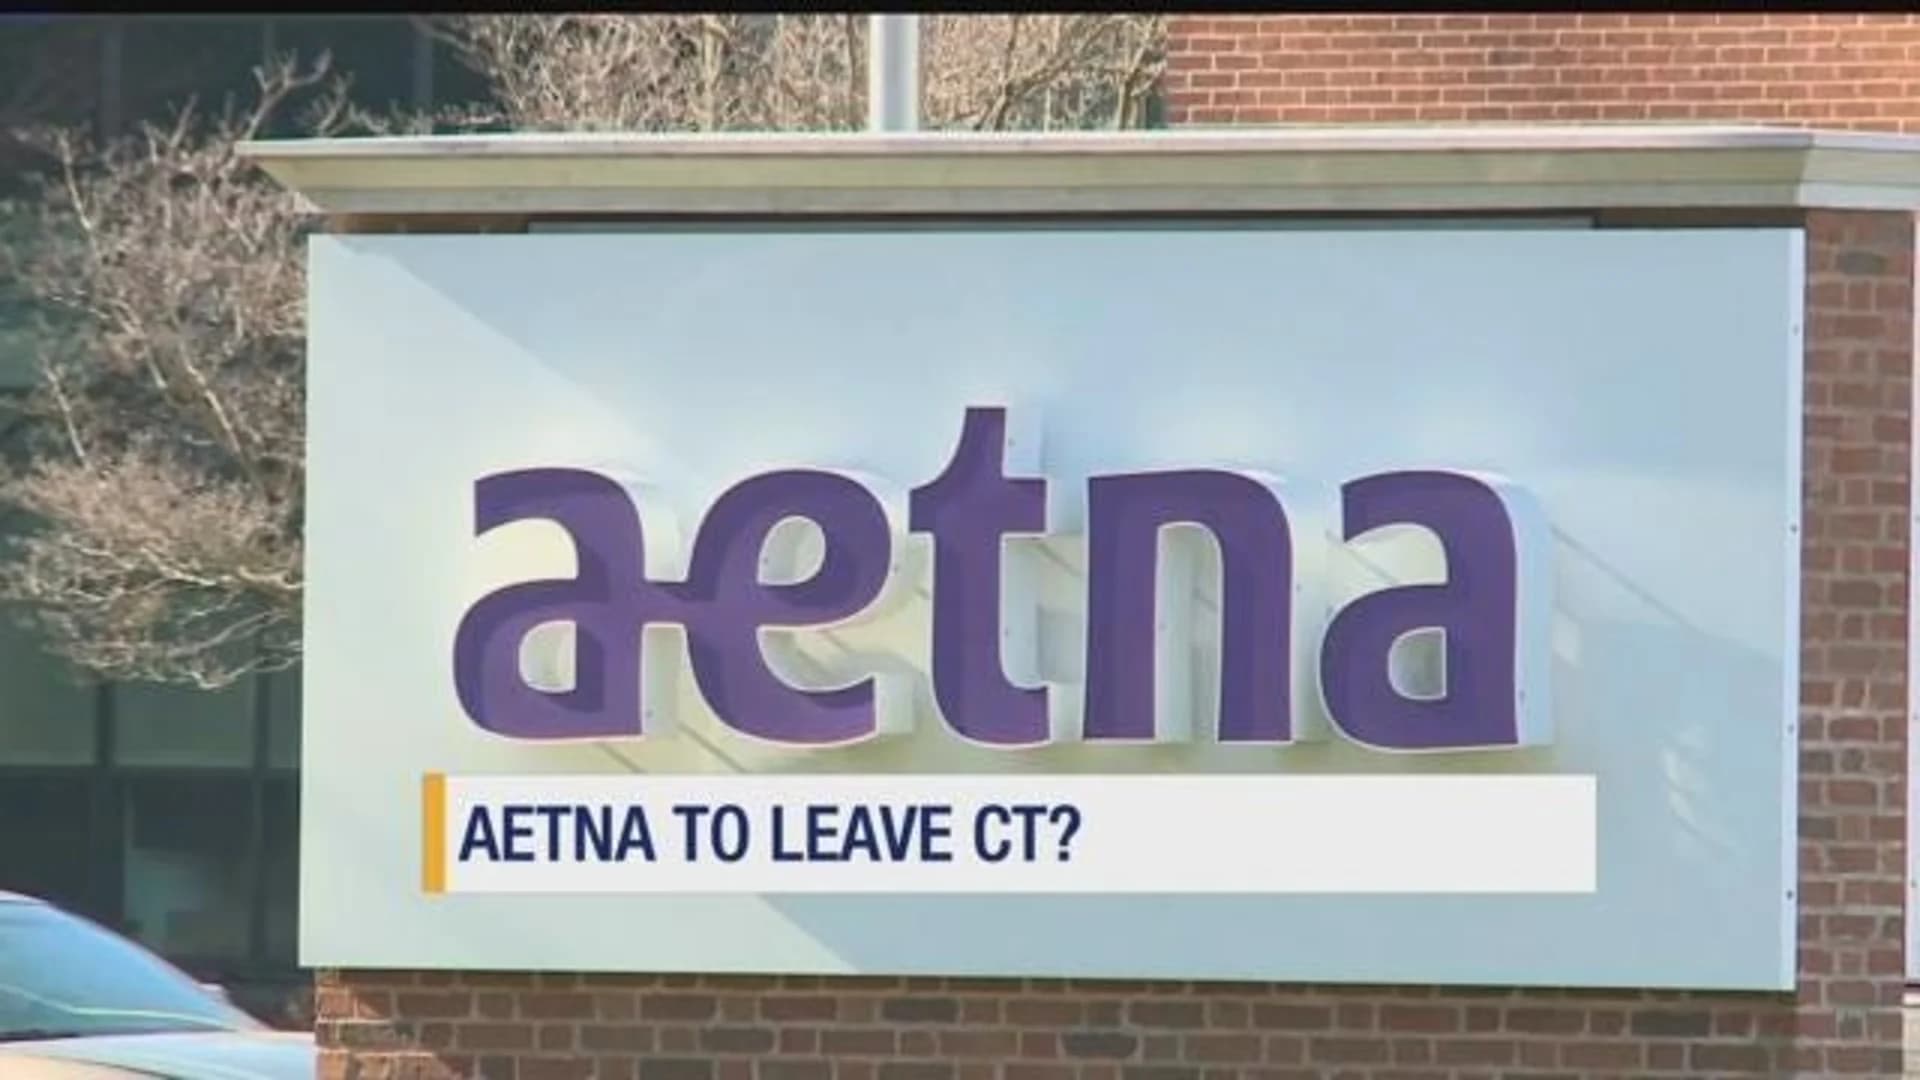 Insurance giant Aetna may move out of Connecticut